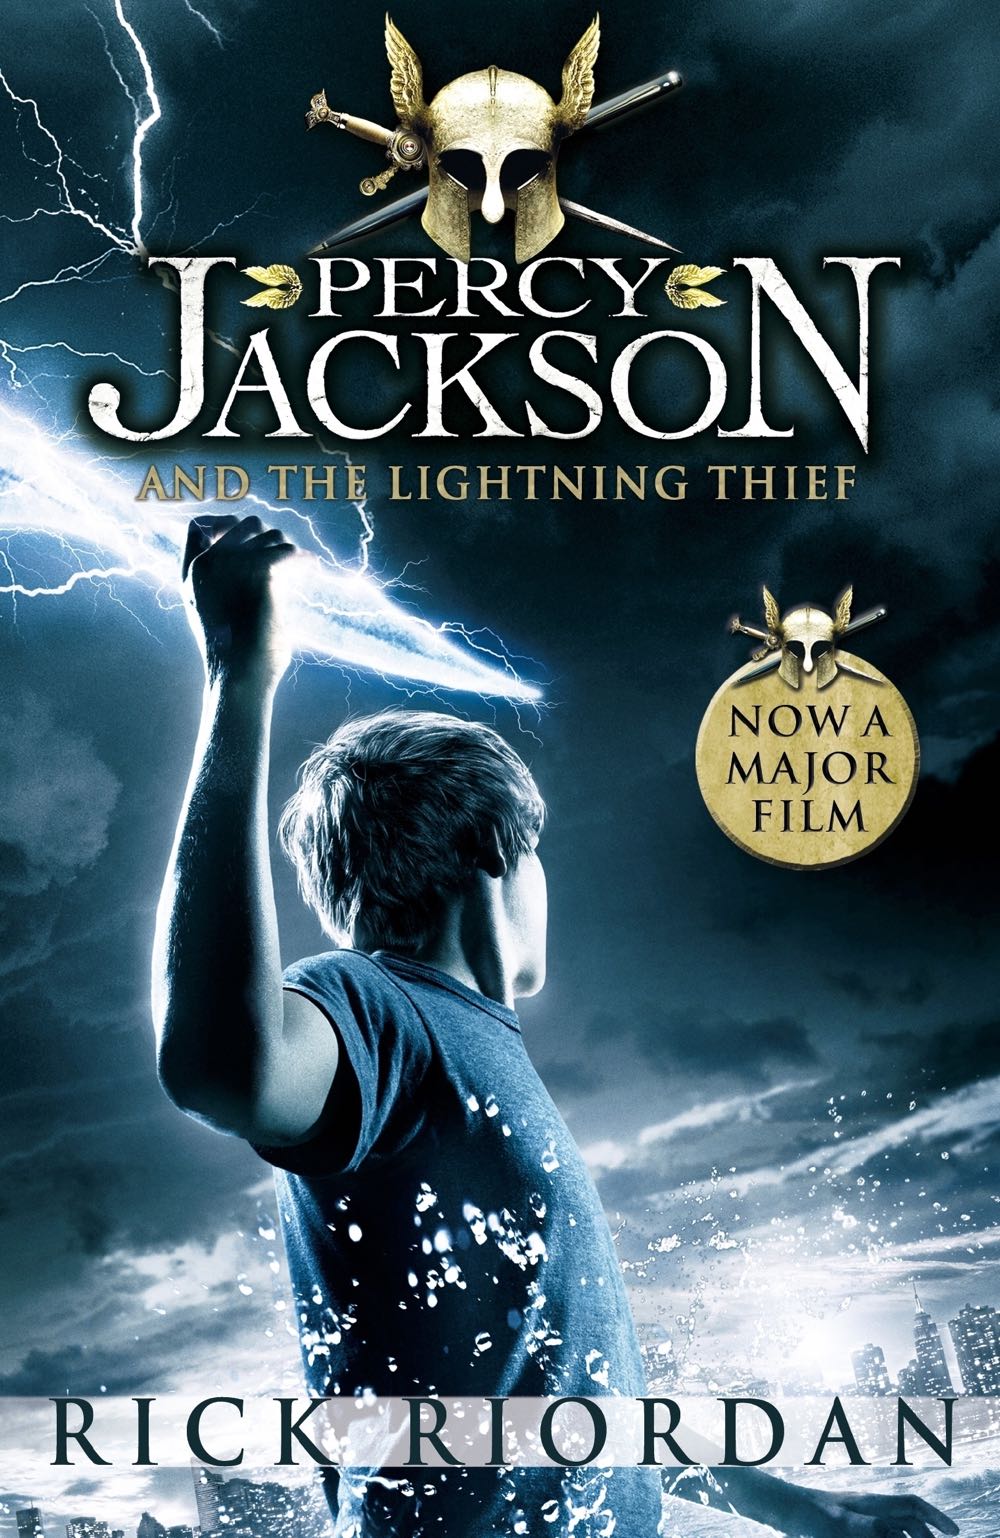 1 The Lightning Thief Percy Jackson and the Olympians - Rick Riordan (Hyperion Books for Children - Paperback) book collectible [Barcode 9780786838653] - Main Image 4